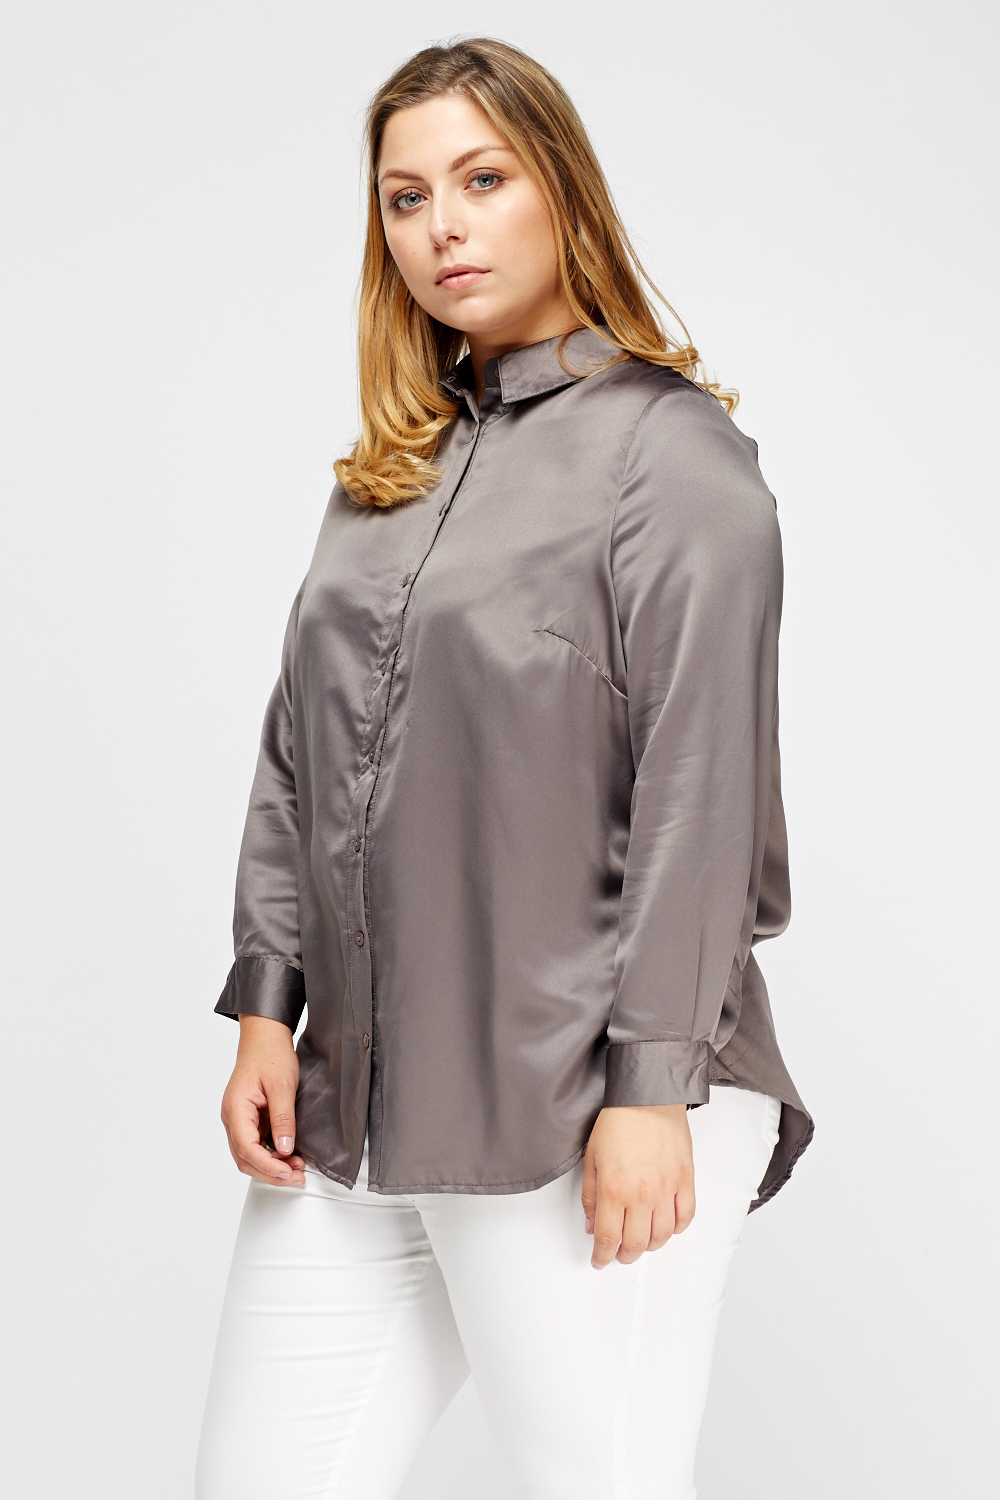 Embroidered Back Satin Blouse - Just $7